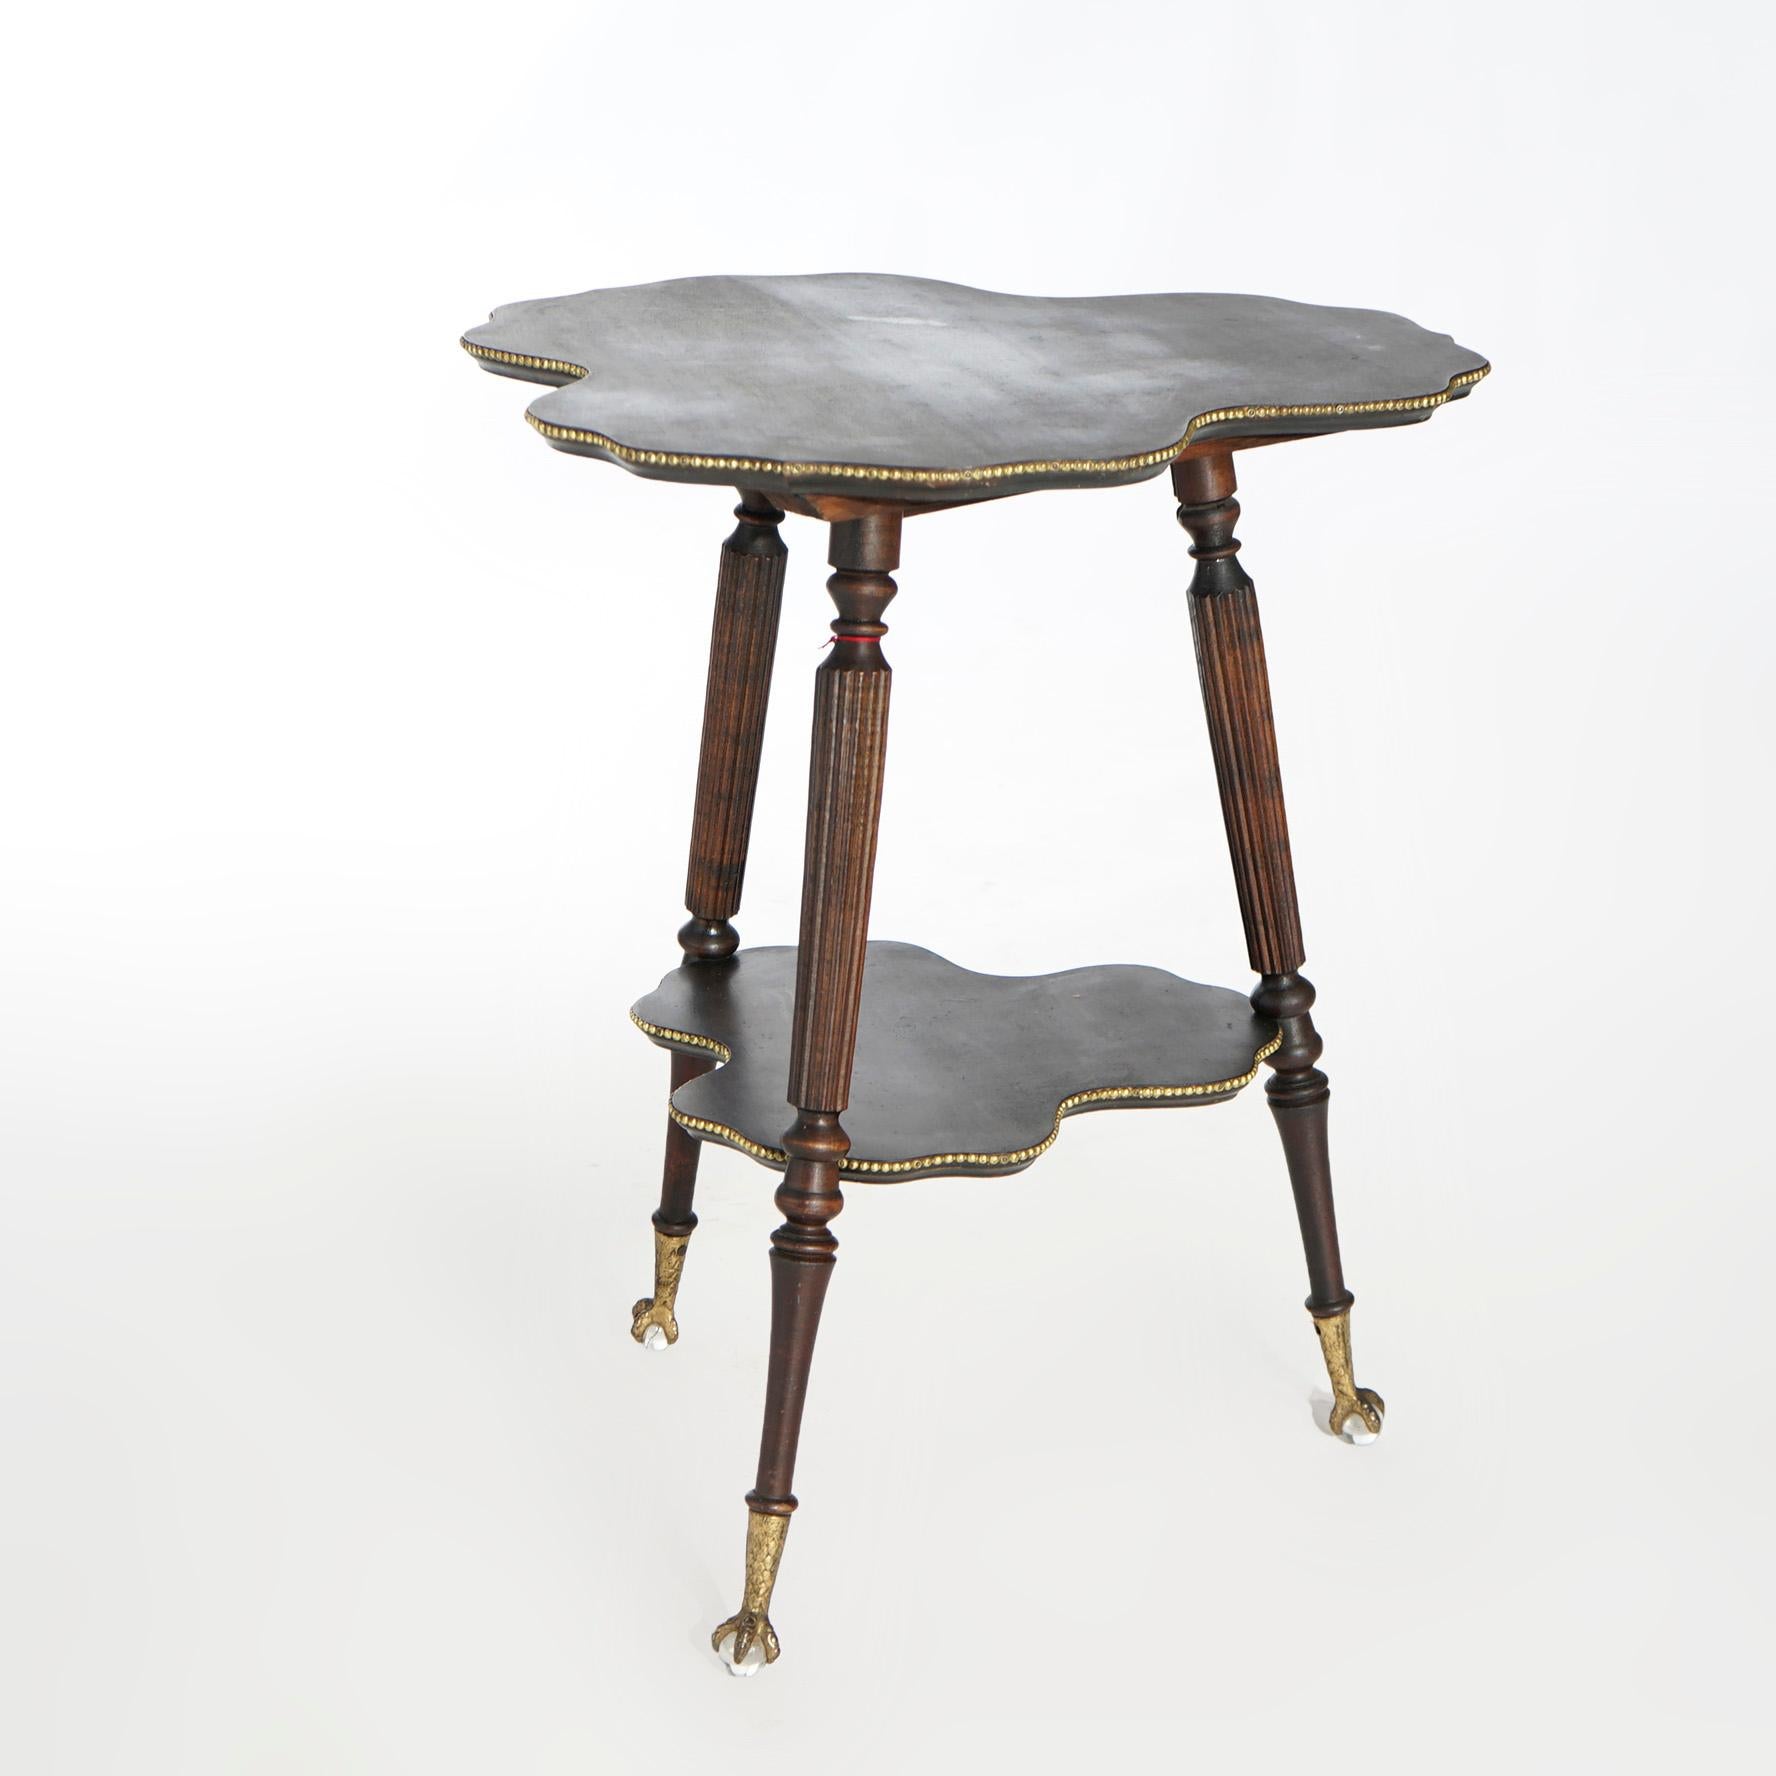 An antique side stand in the manner of Horner offers mahogany construction with cloverleaf to and lower display raised on flared turned legs terminating in claw and ball feet, c1900

Measures- 30'' H x 25'' W x 25'' D.

Catalogue Note: Ask about